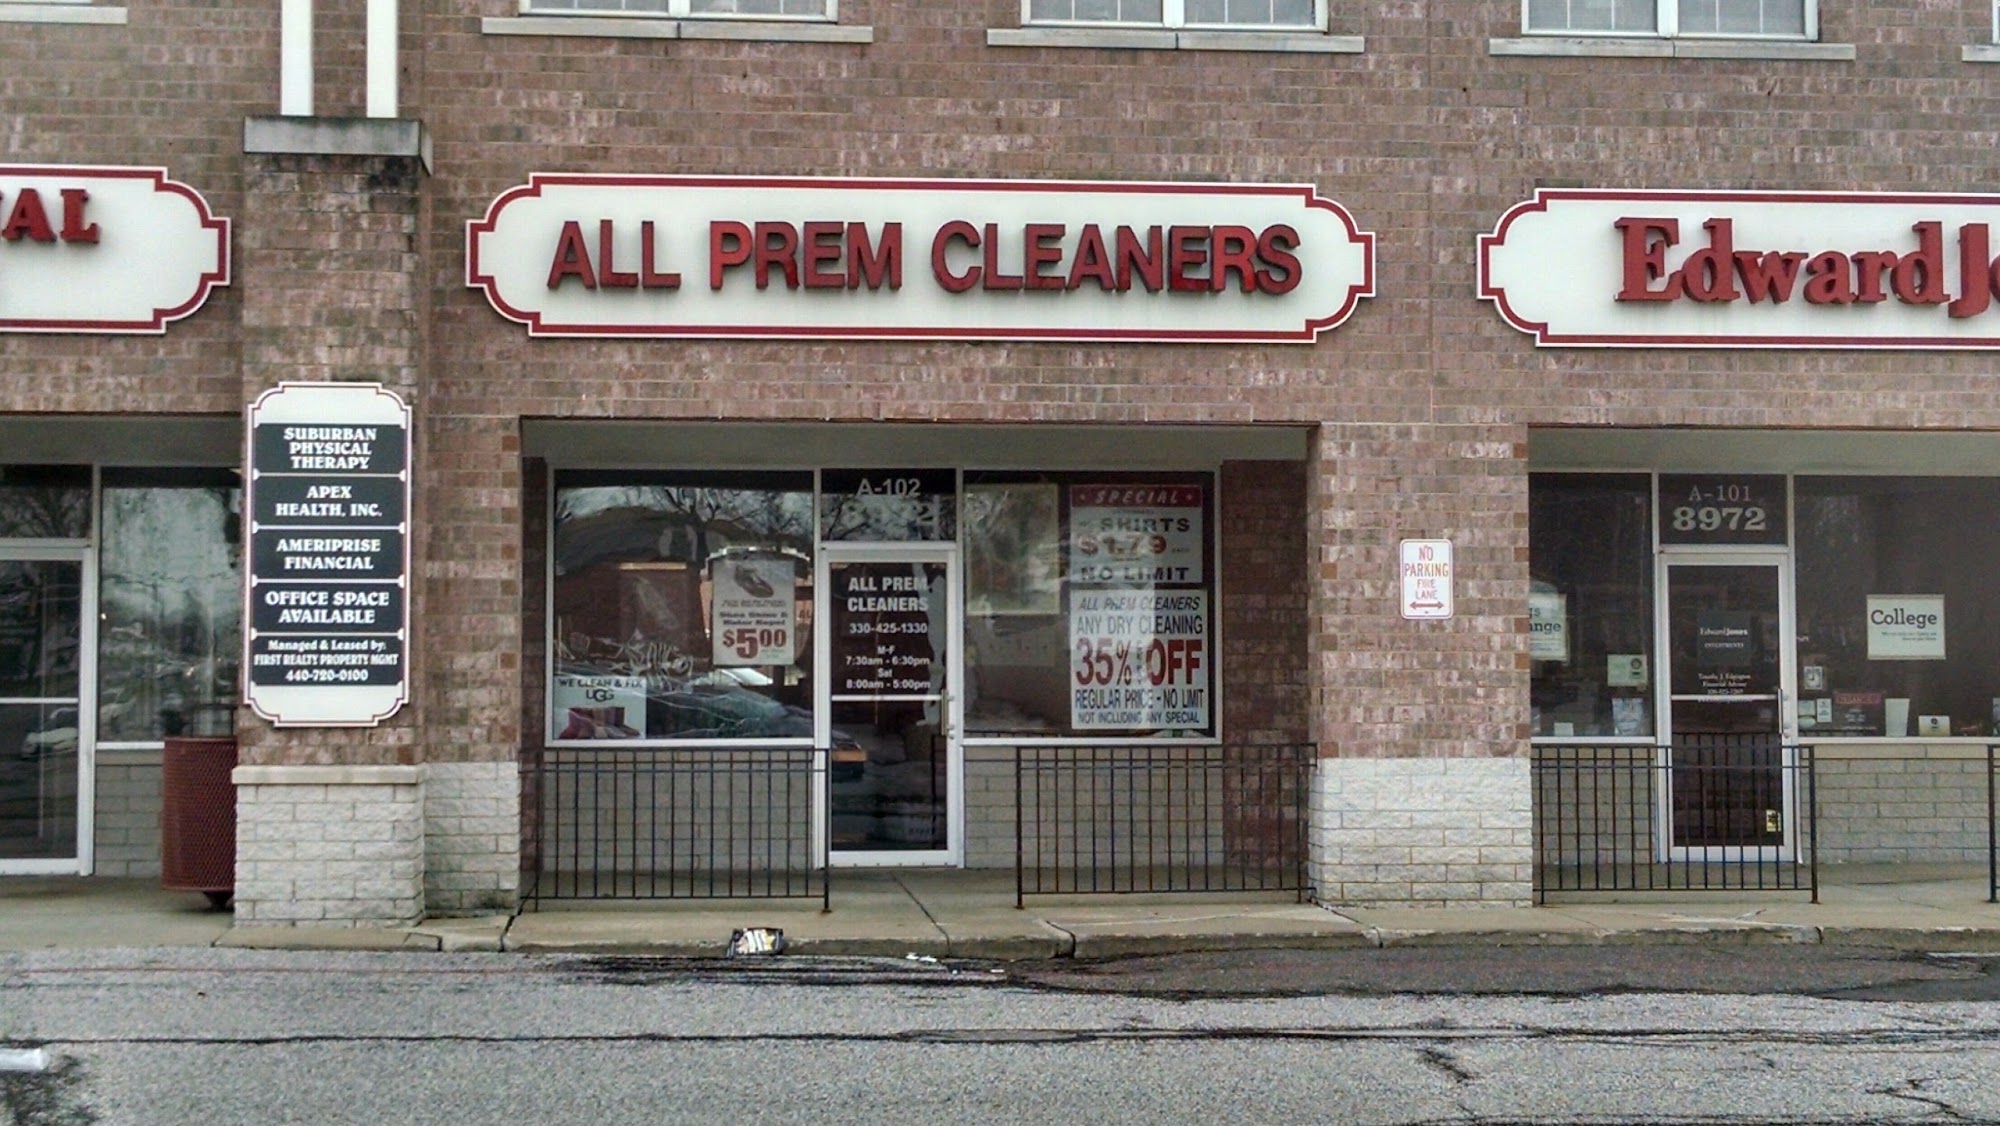 All Prem Cleaners